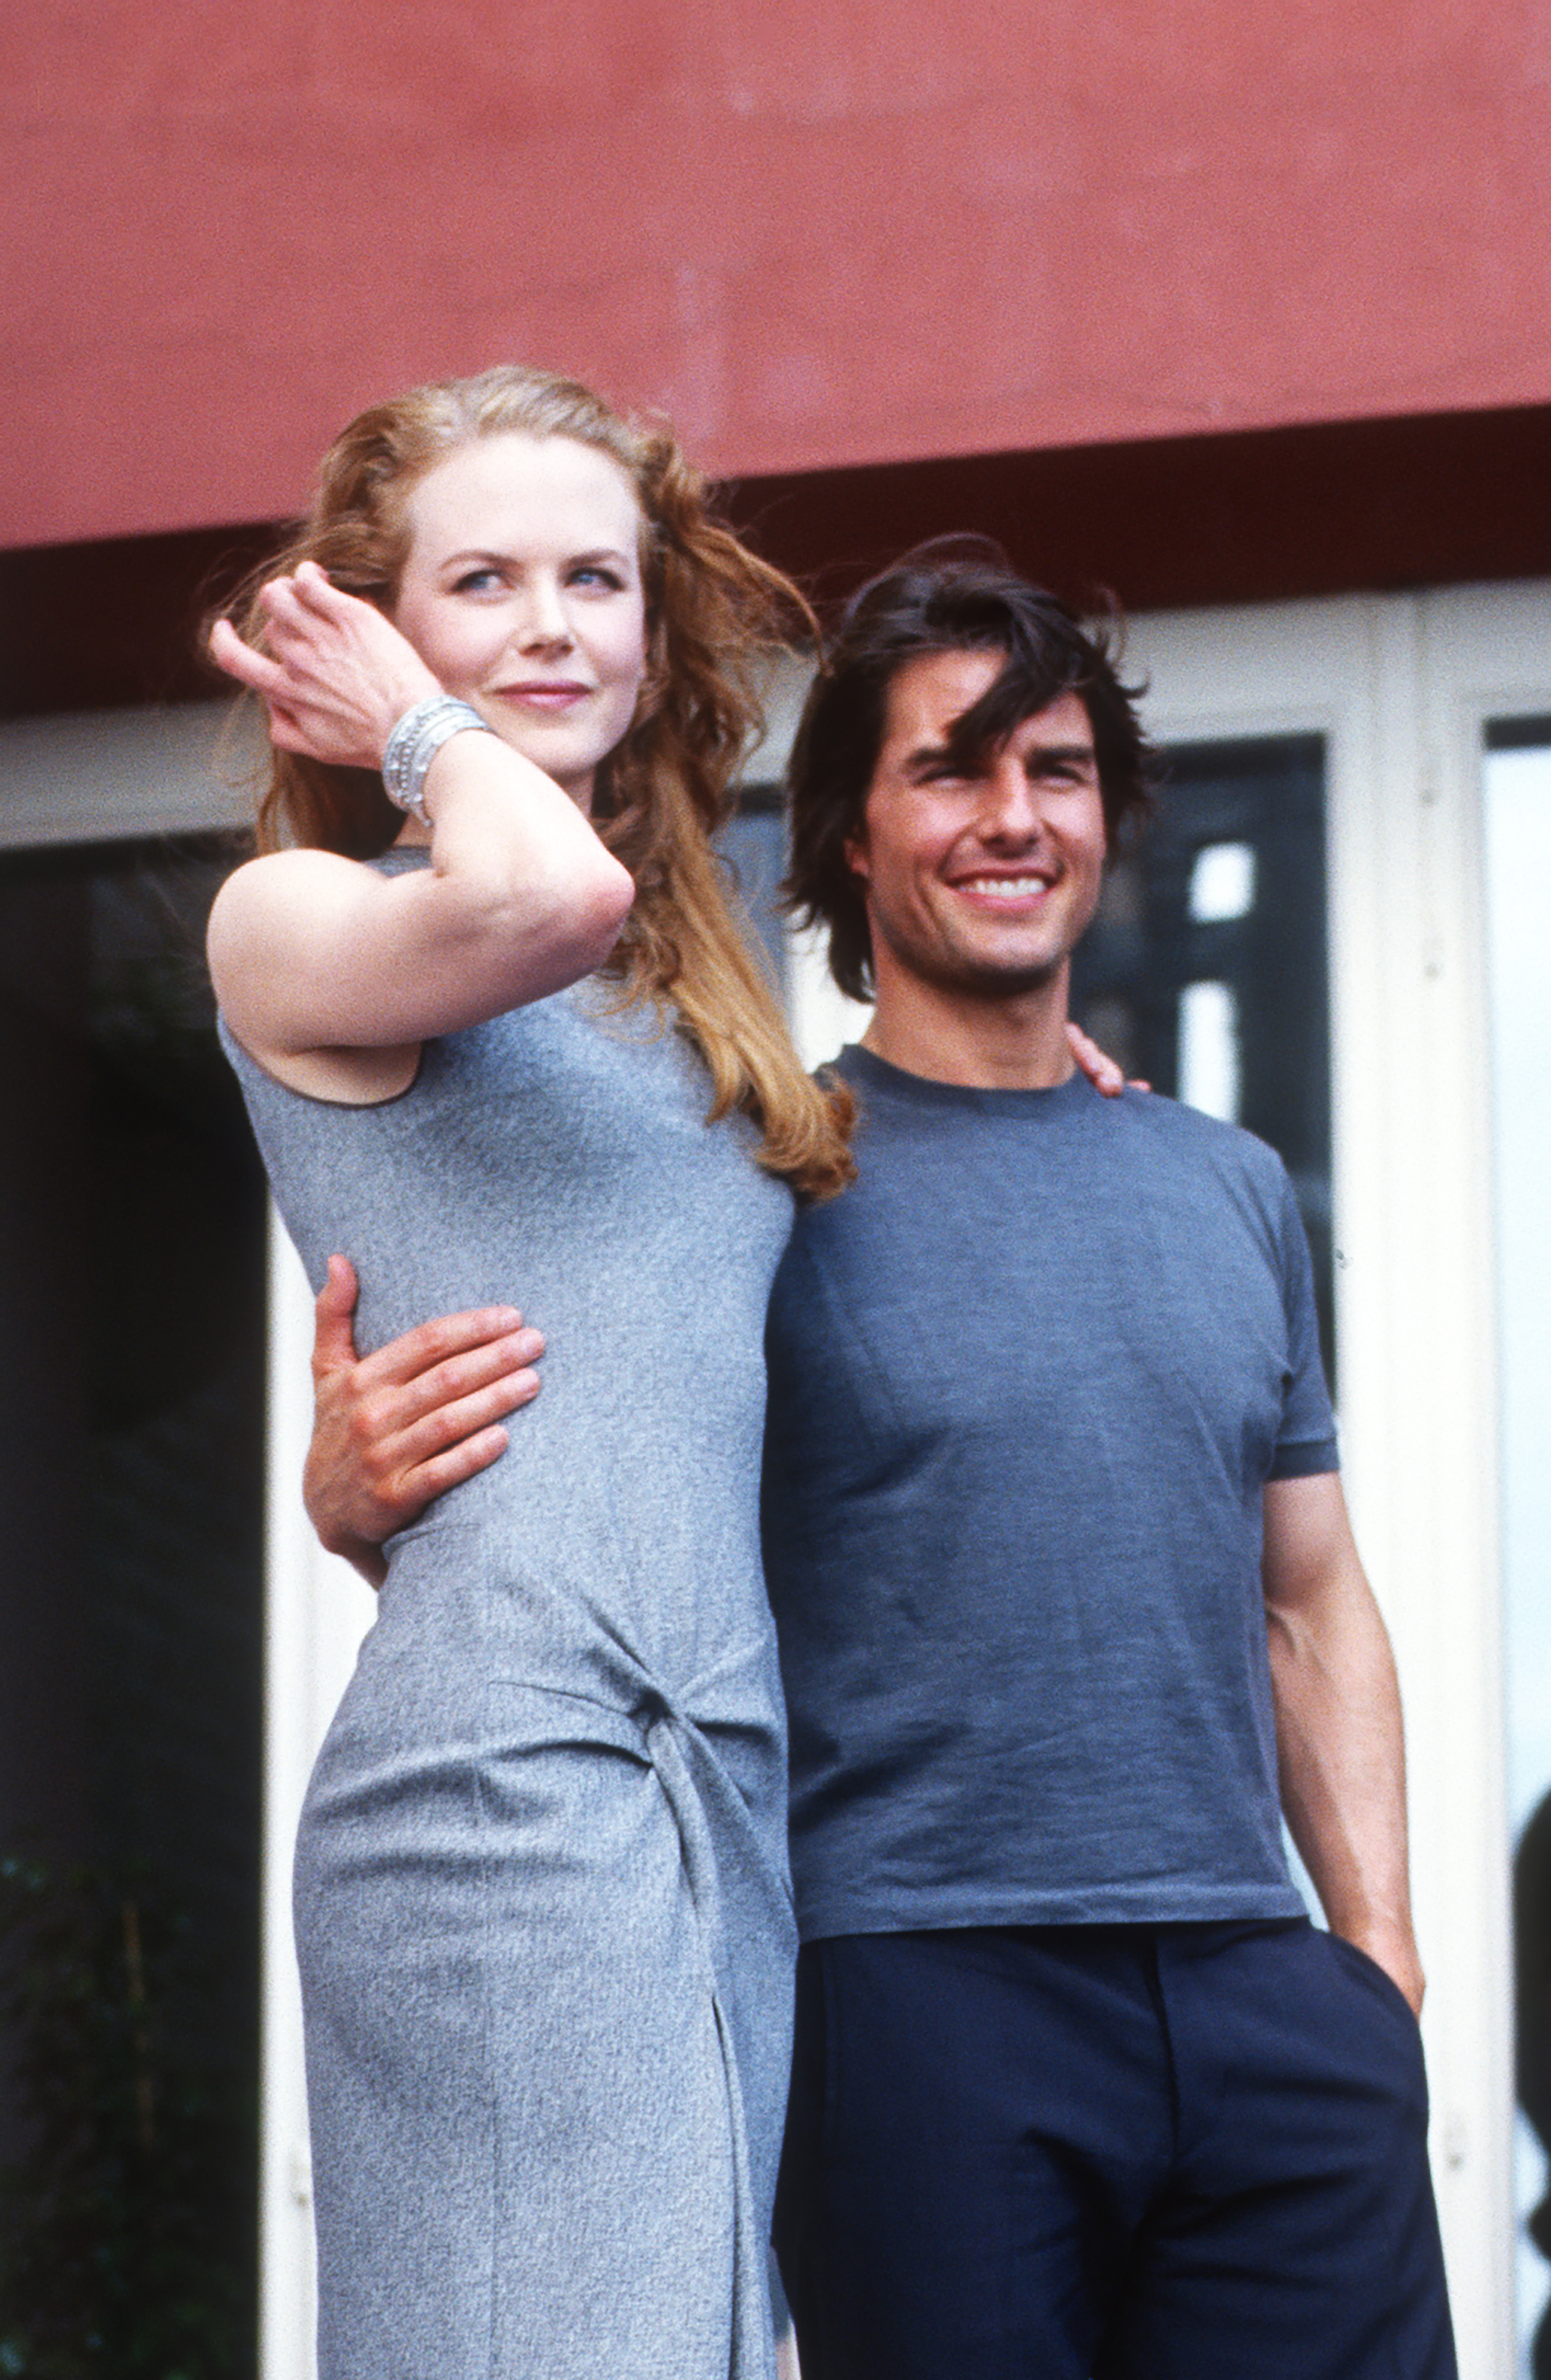 Nicole Kidman and Tom Cruise promoting their film, "Eyes Wide Shut" at the Venice International Film Festival on September 3, 1999 | Source: Getty Images